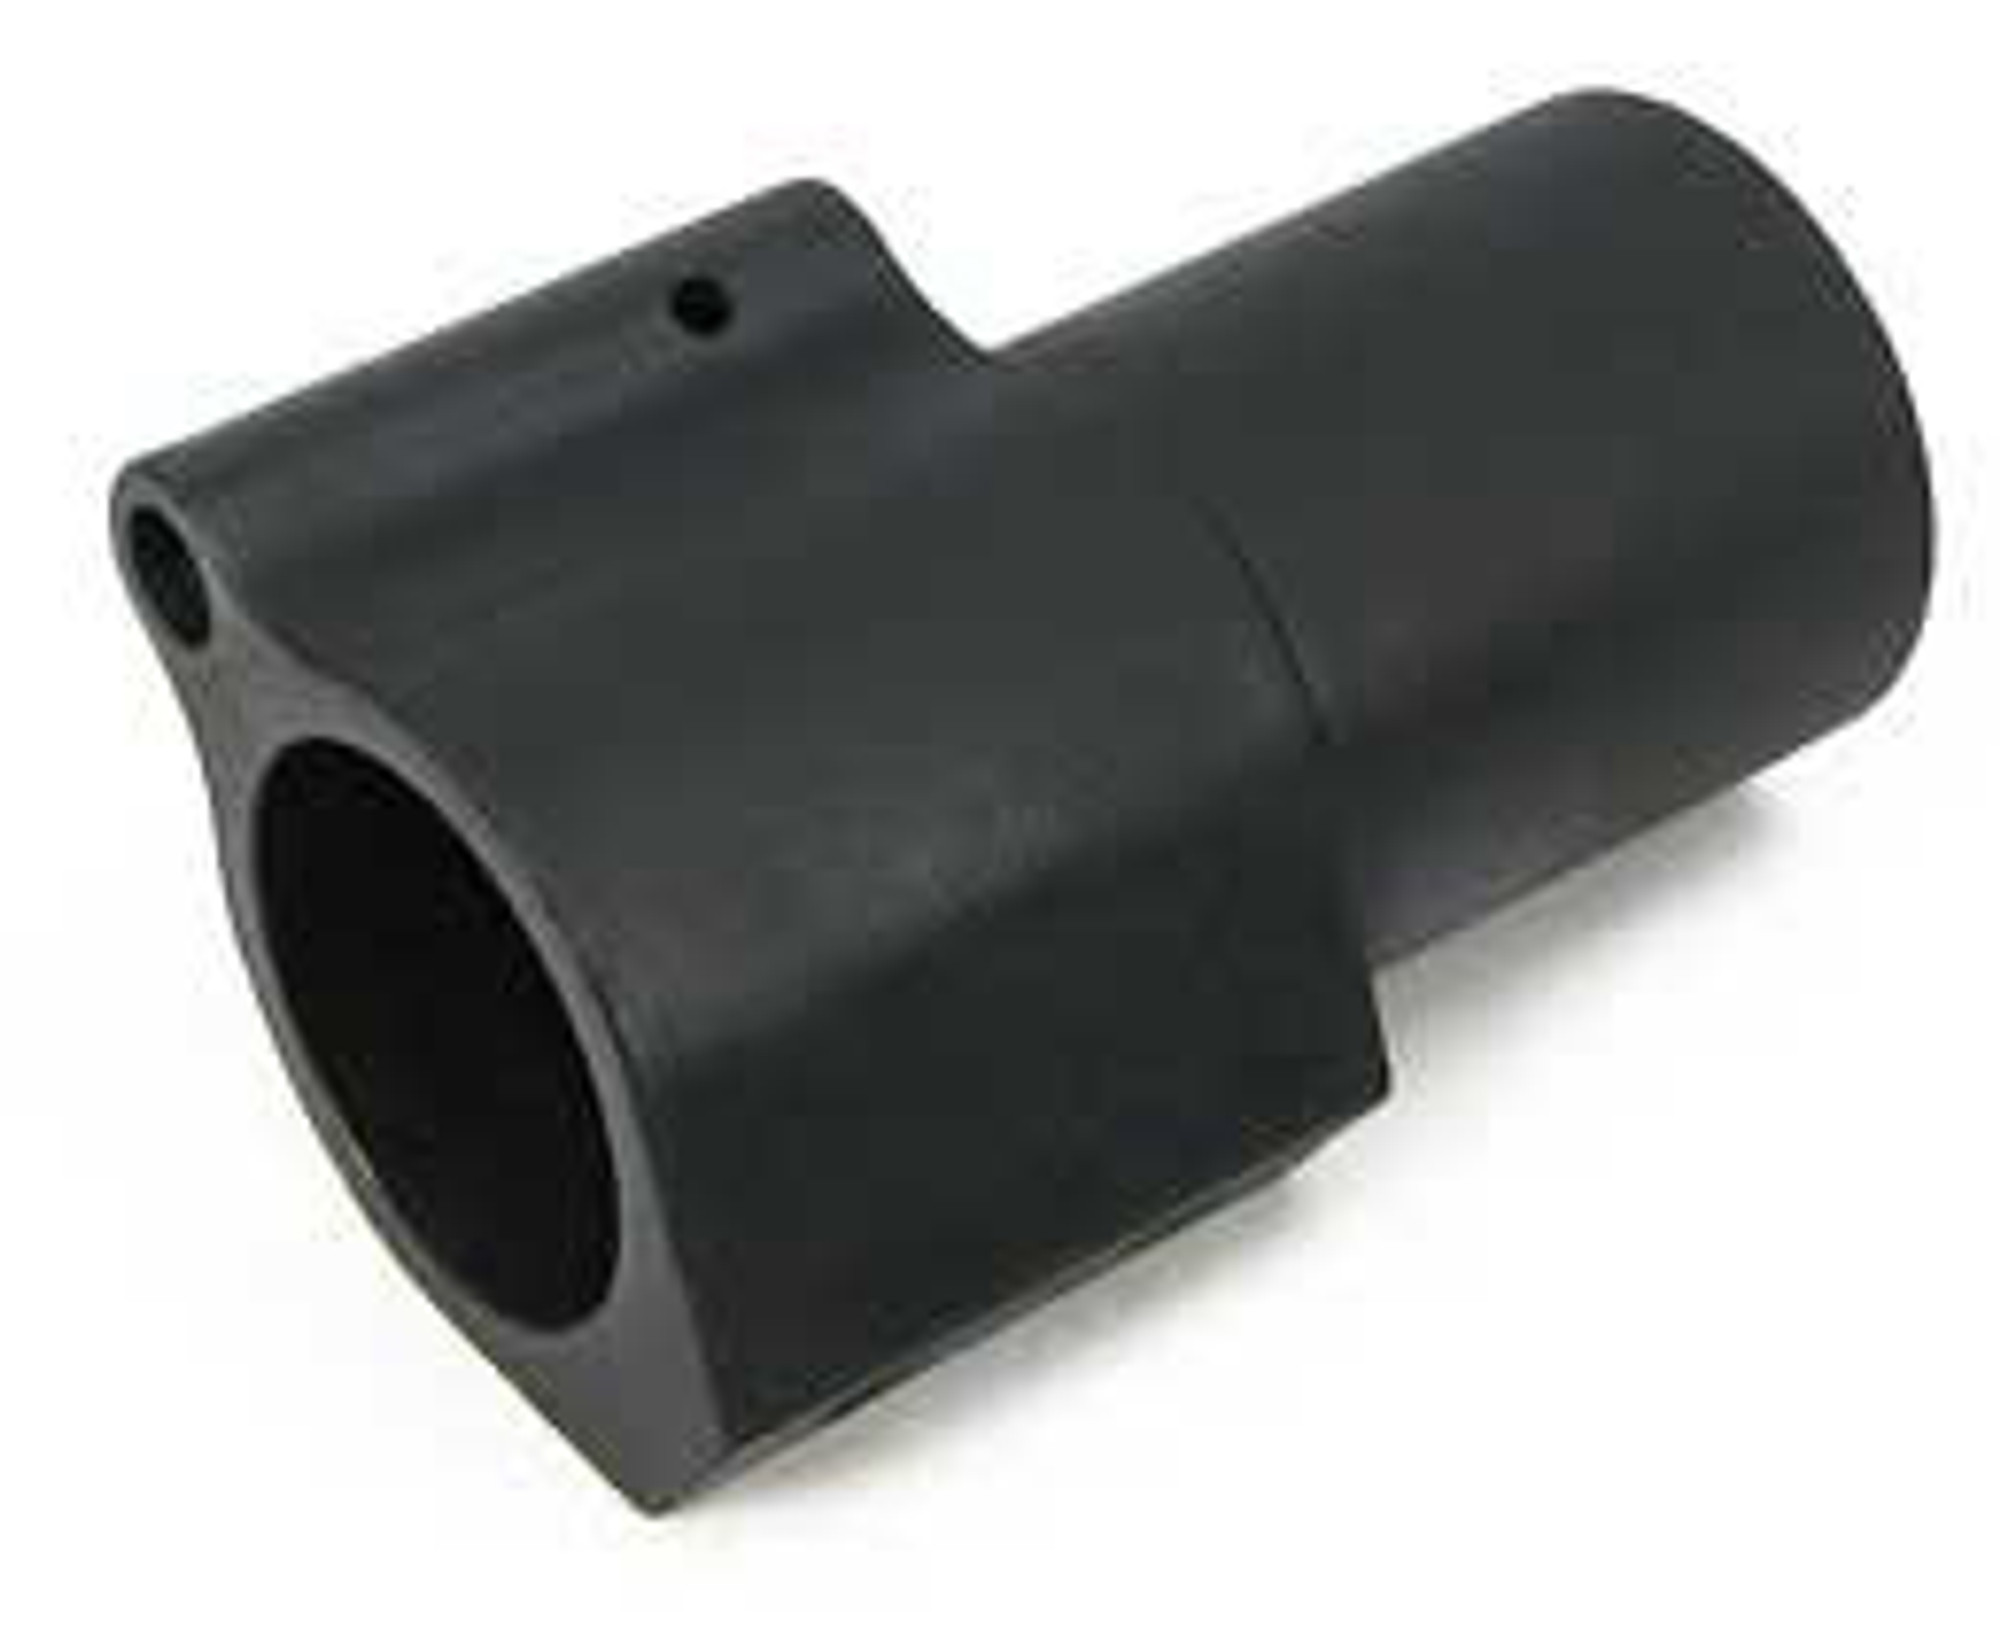 M4 Steel Free Float Low Profile Gas Block Type 3 for M4 / M16 Series Airsoft AEG